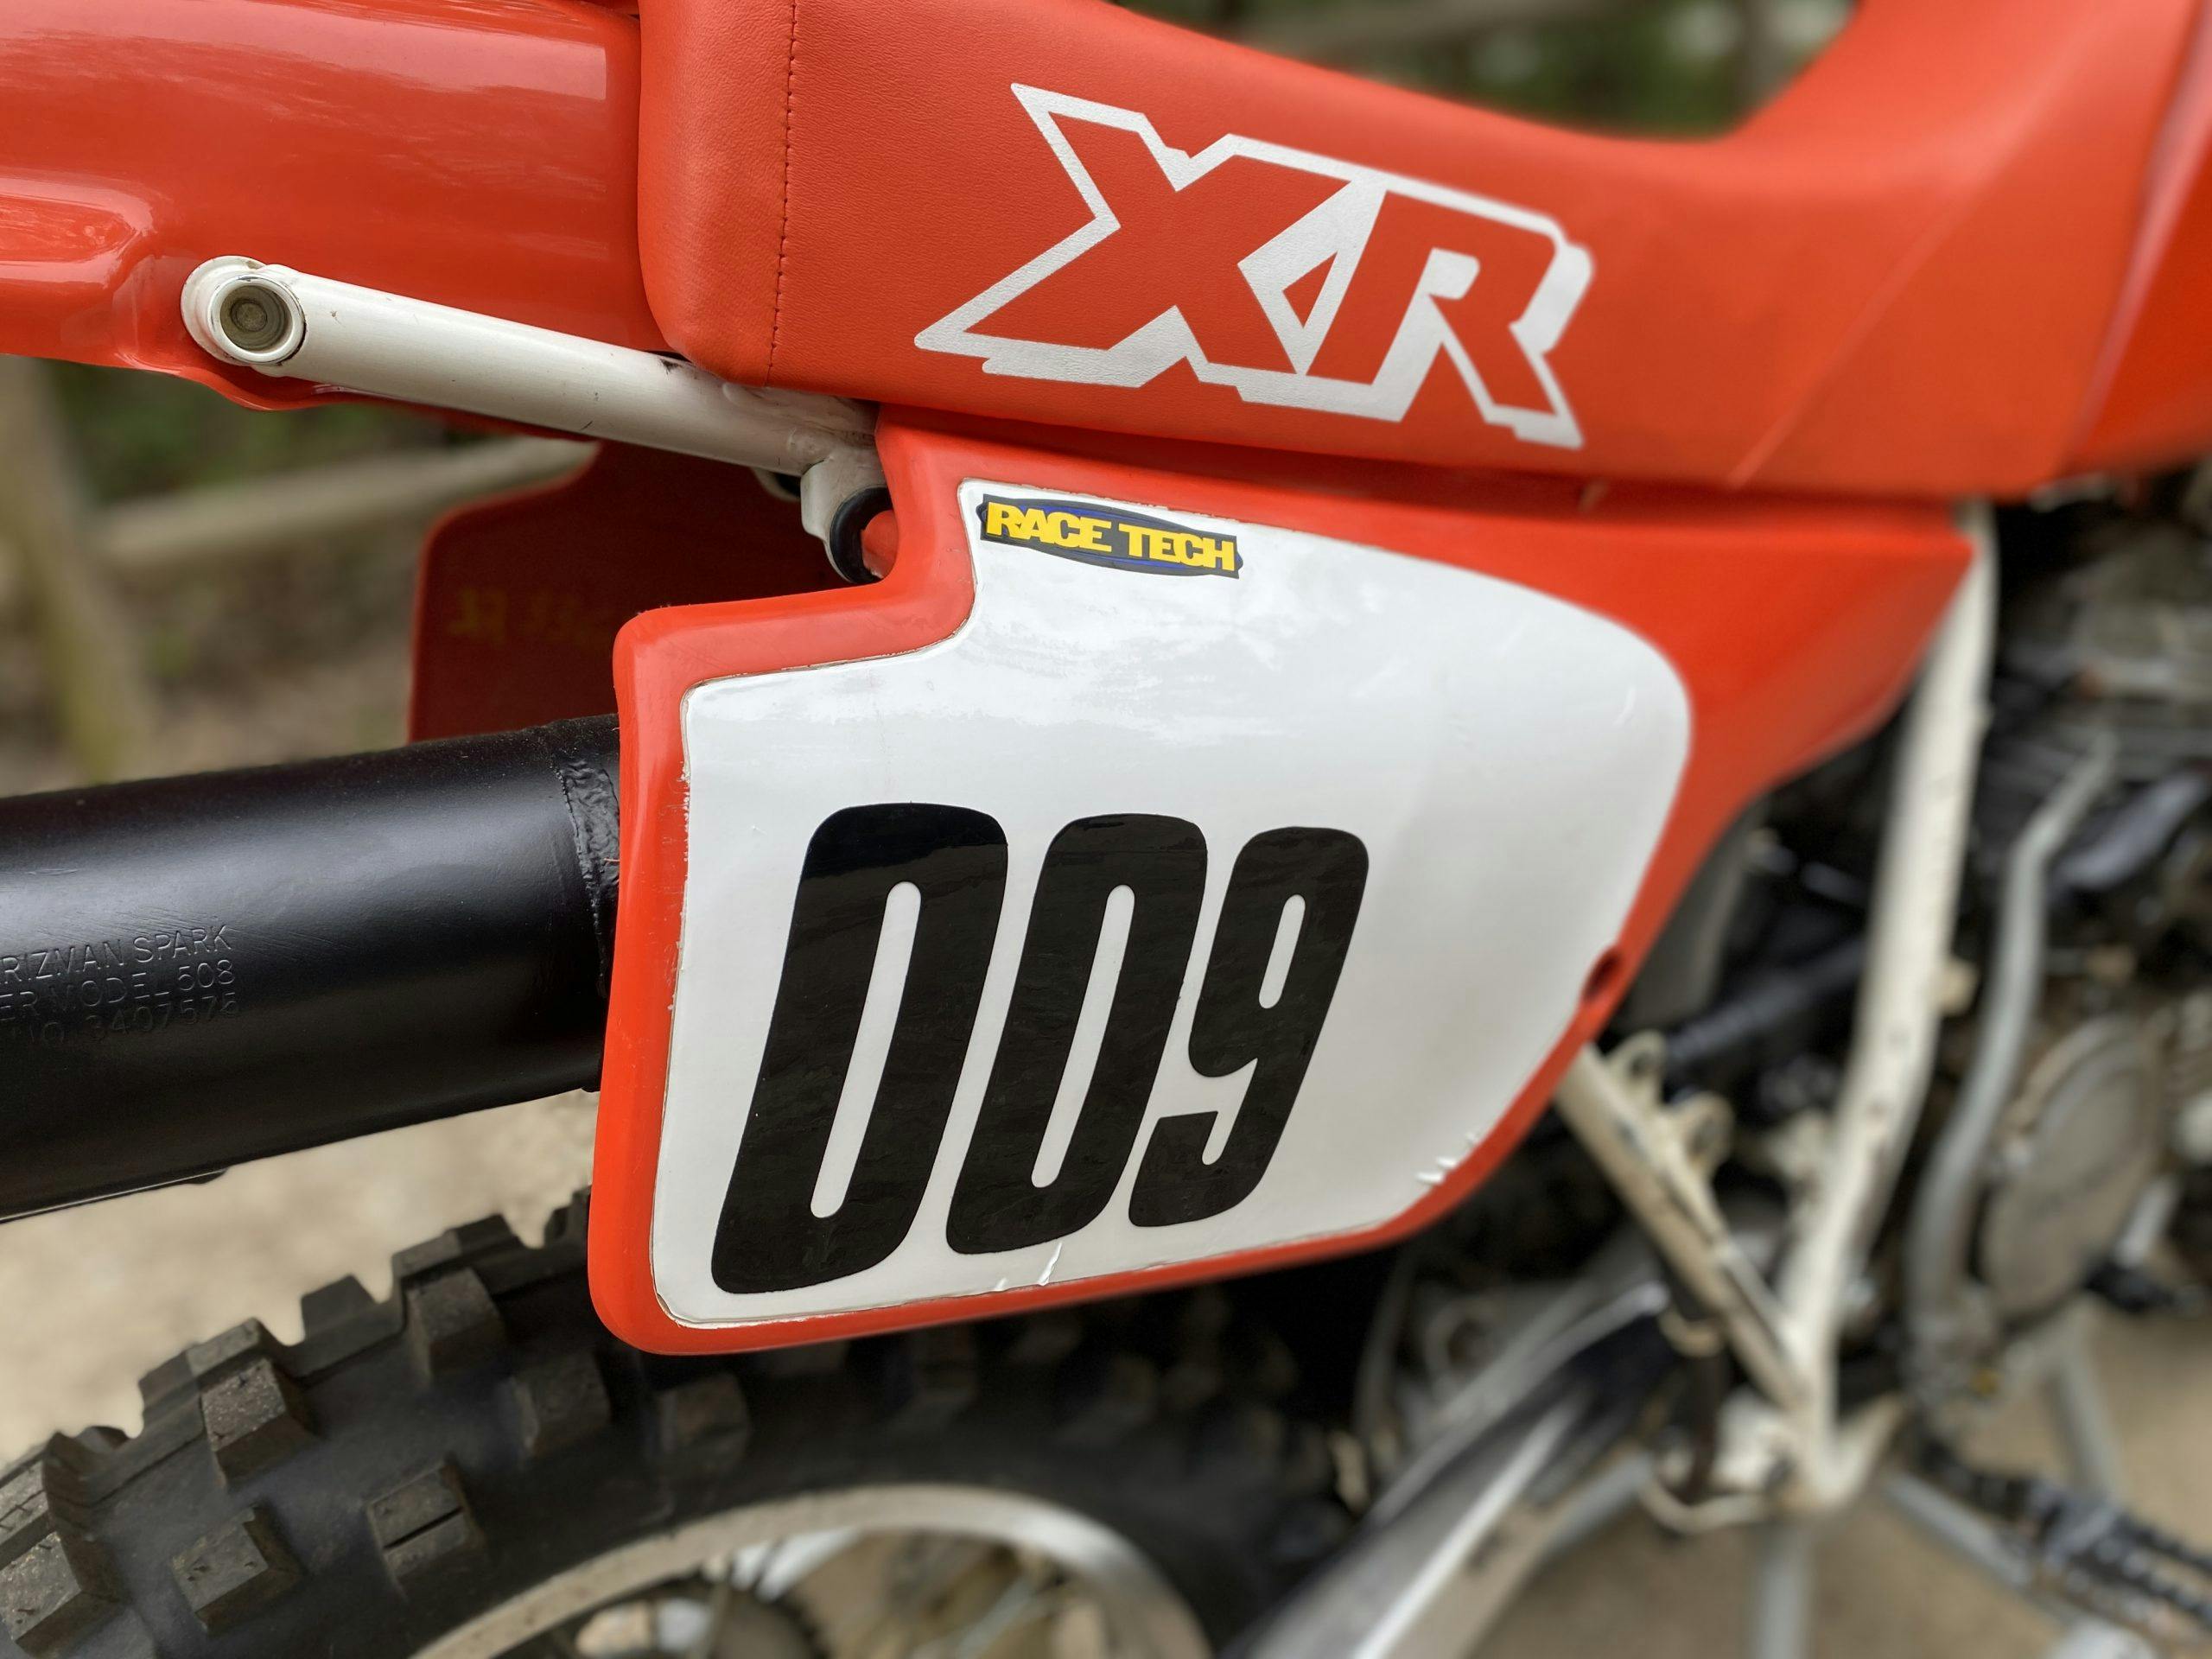 Honda XR250 completed